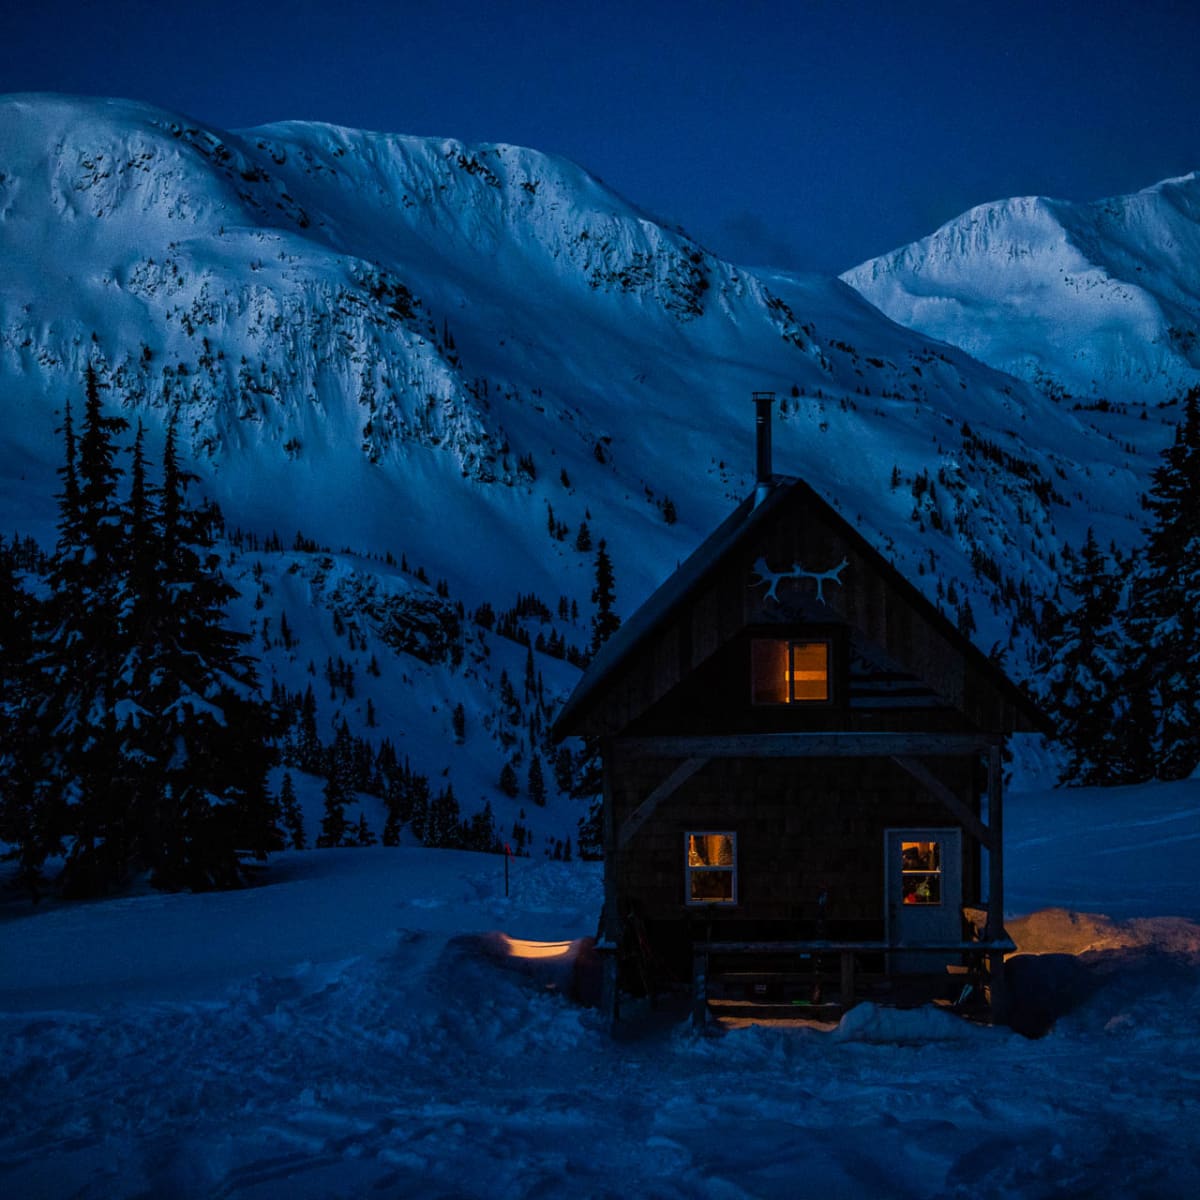 Shames Mountain is a Home that Skiers Built - Powder